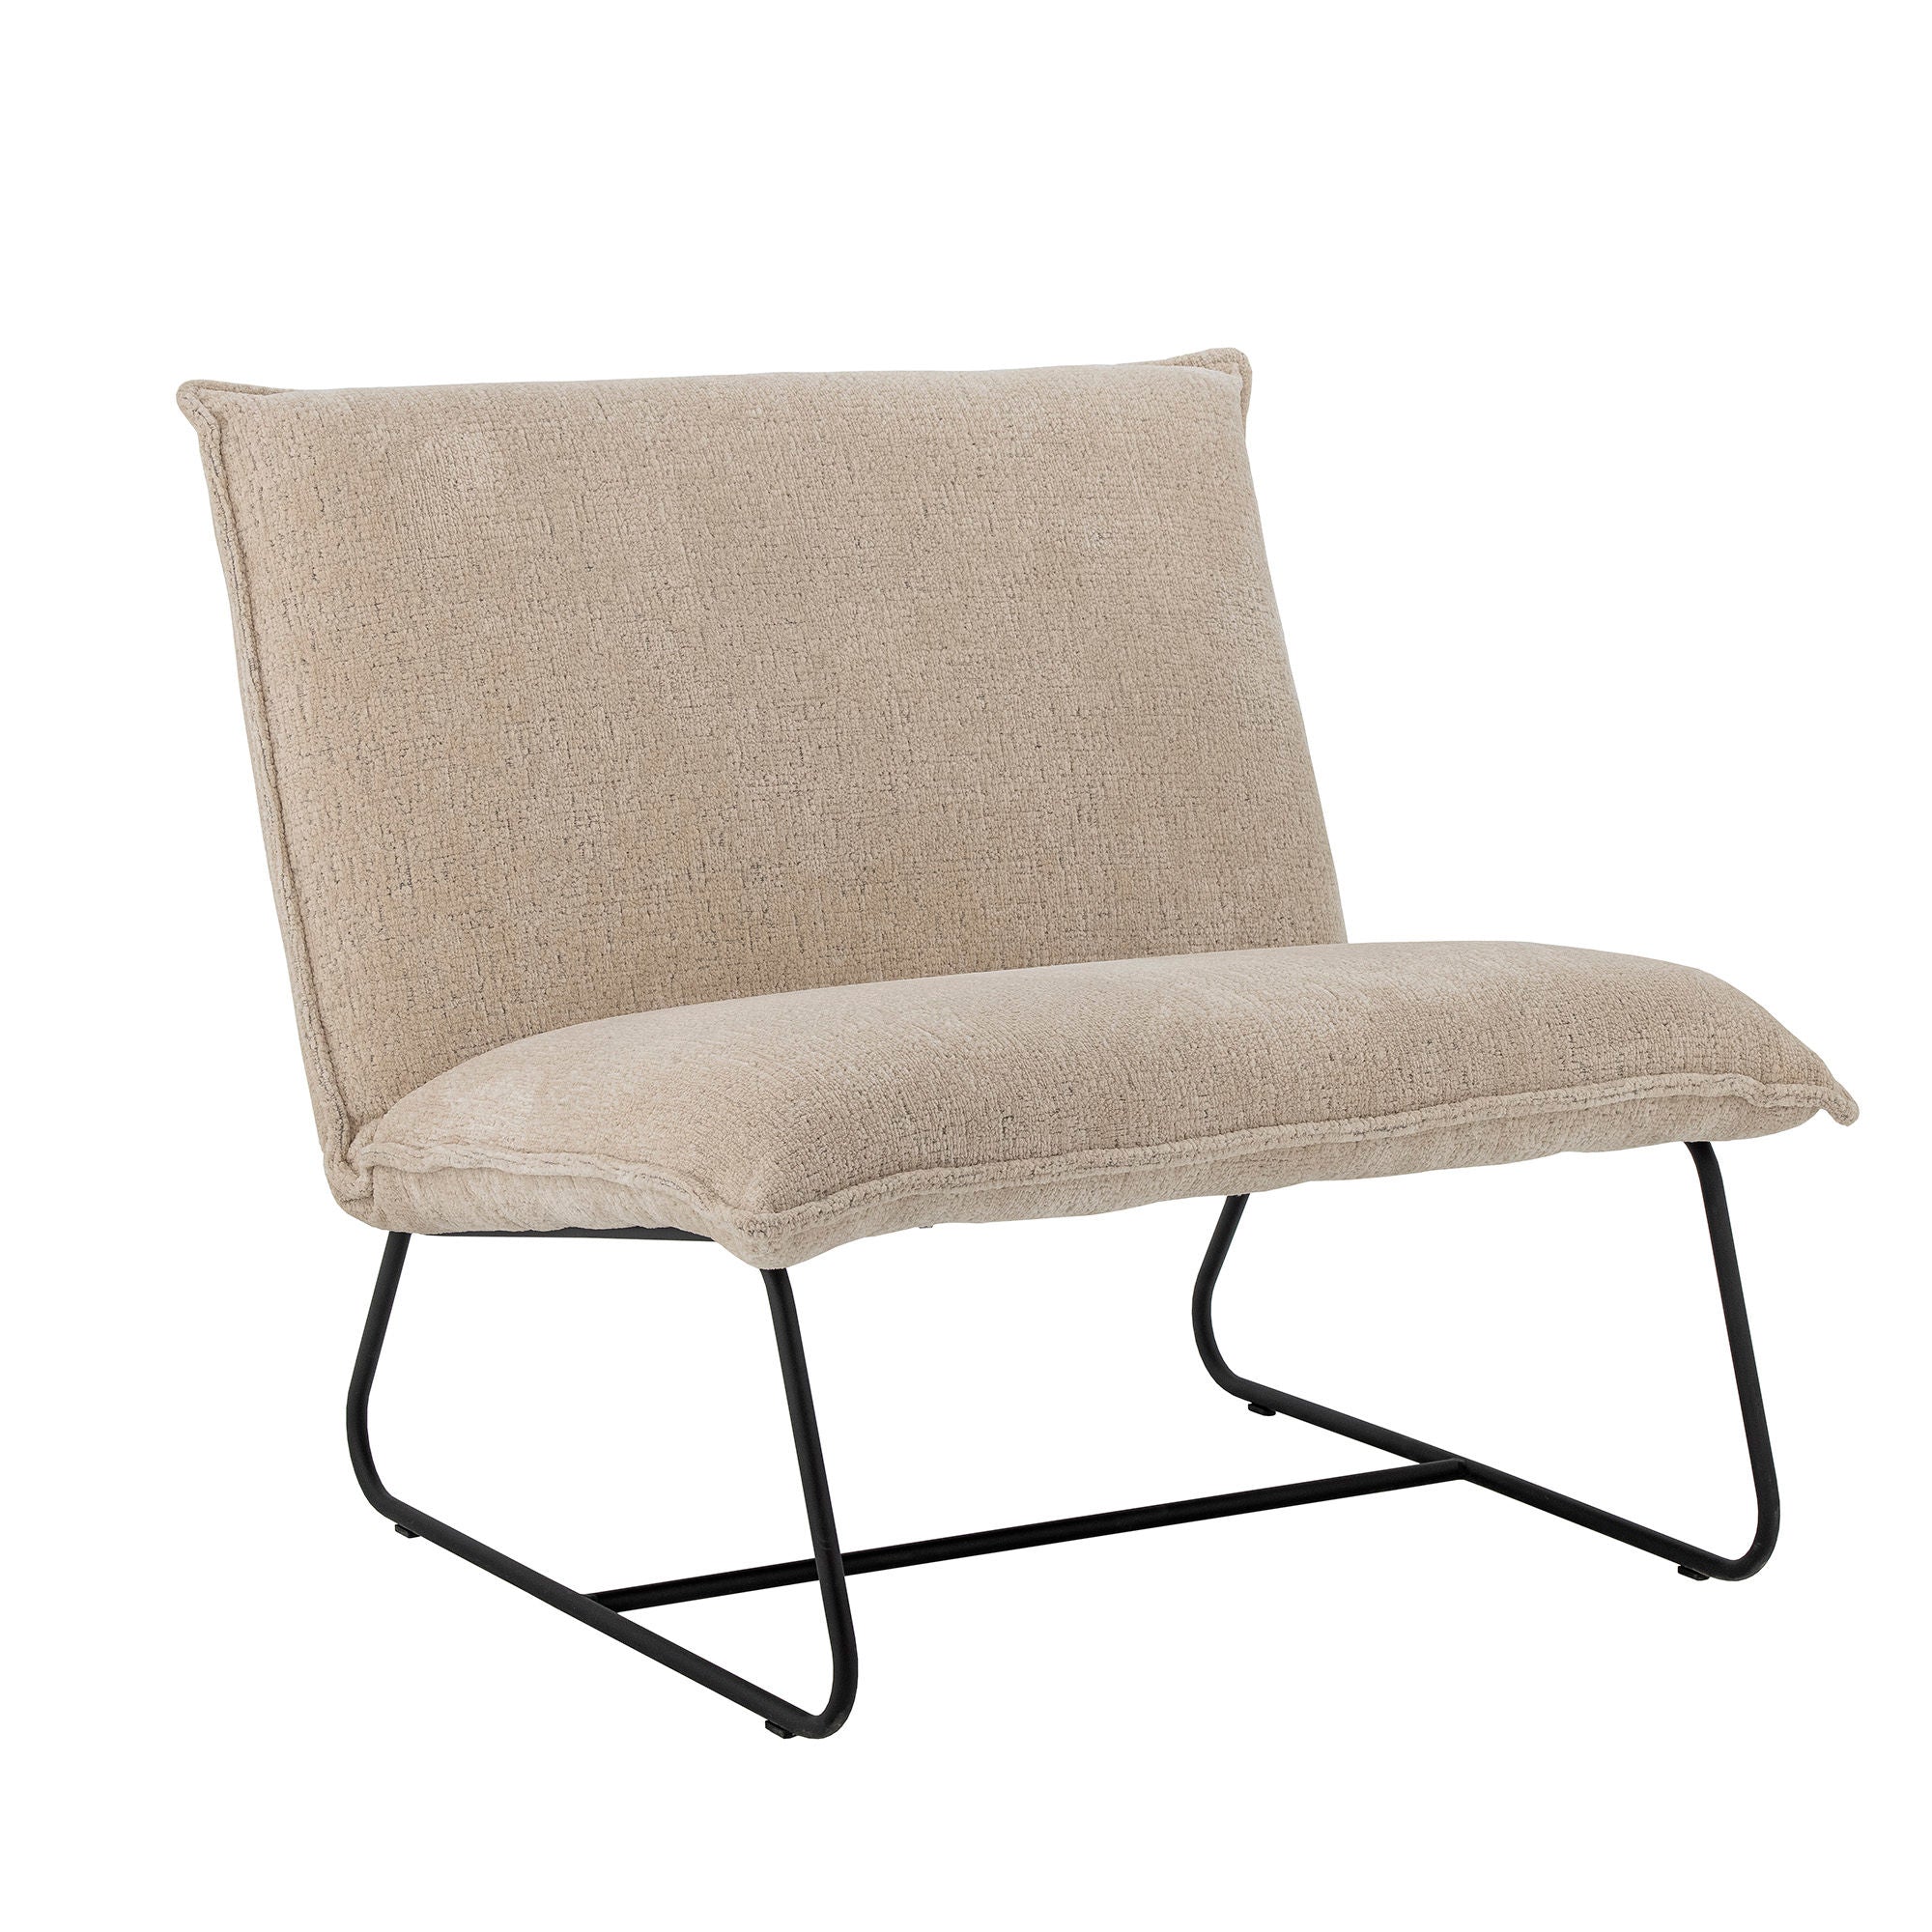 Bloomingville Cape Lounge Chair, Nature, Recycled Polyester